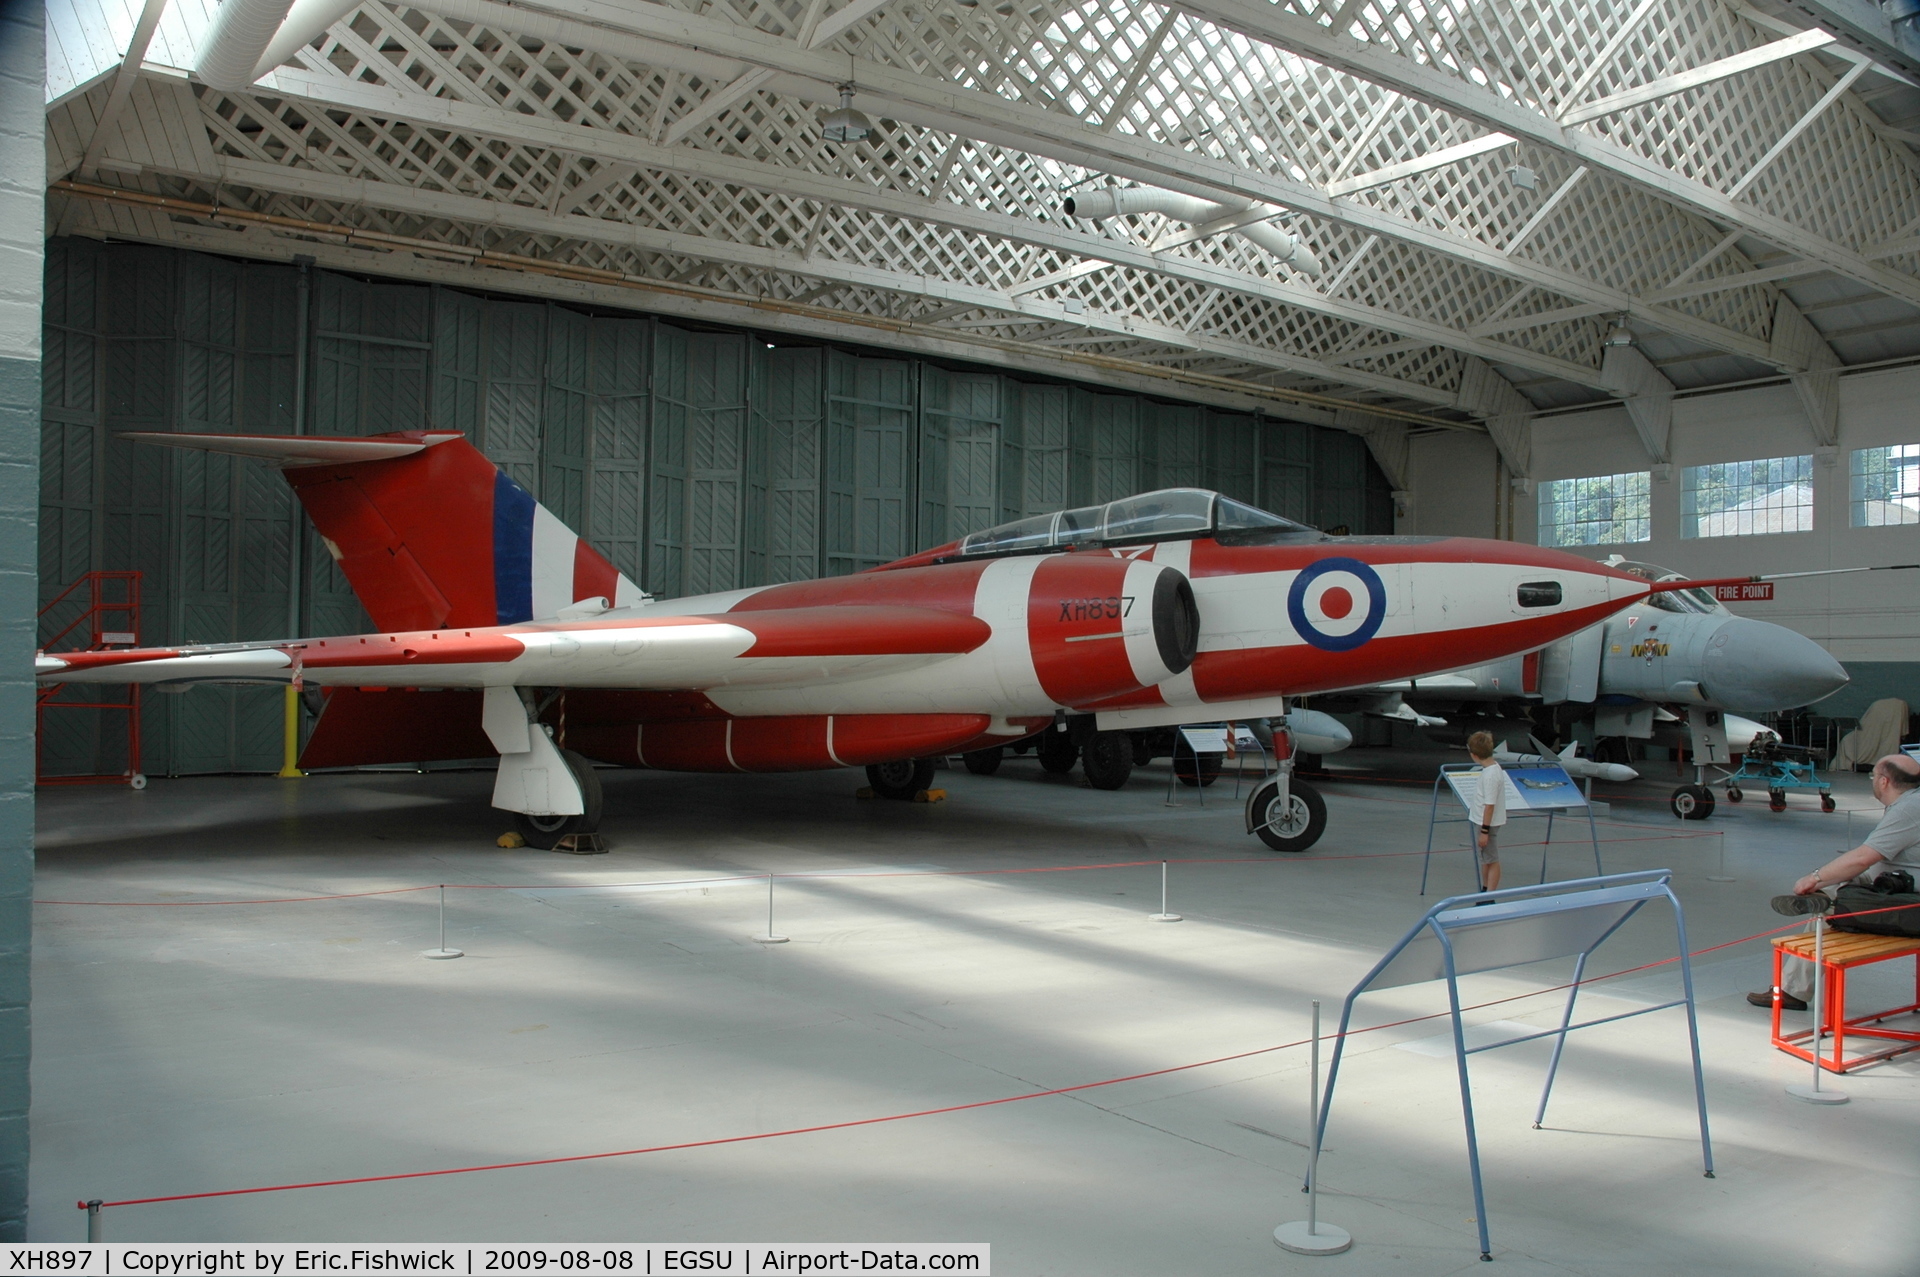 XH897, 1958 Gloster Javelin FAW.9 C/N Not found XH897, XH897 at The Imperial War Museum, Duxford